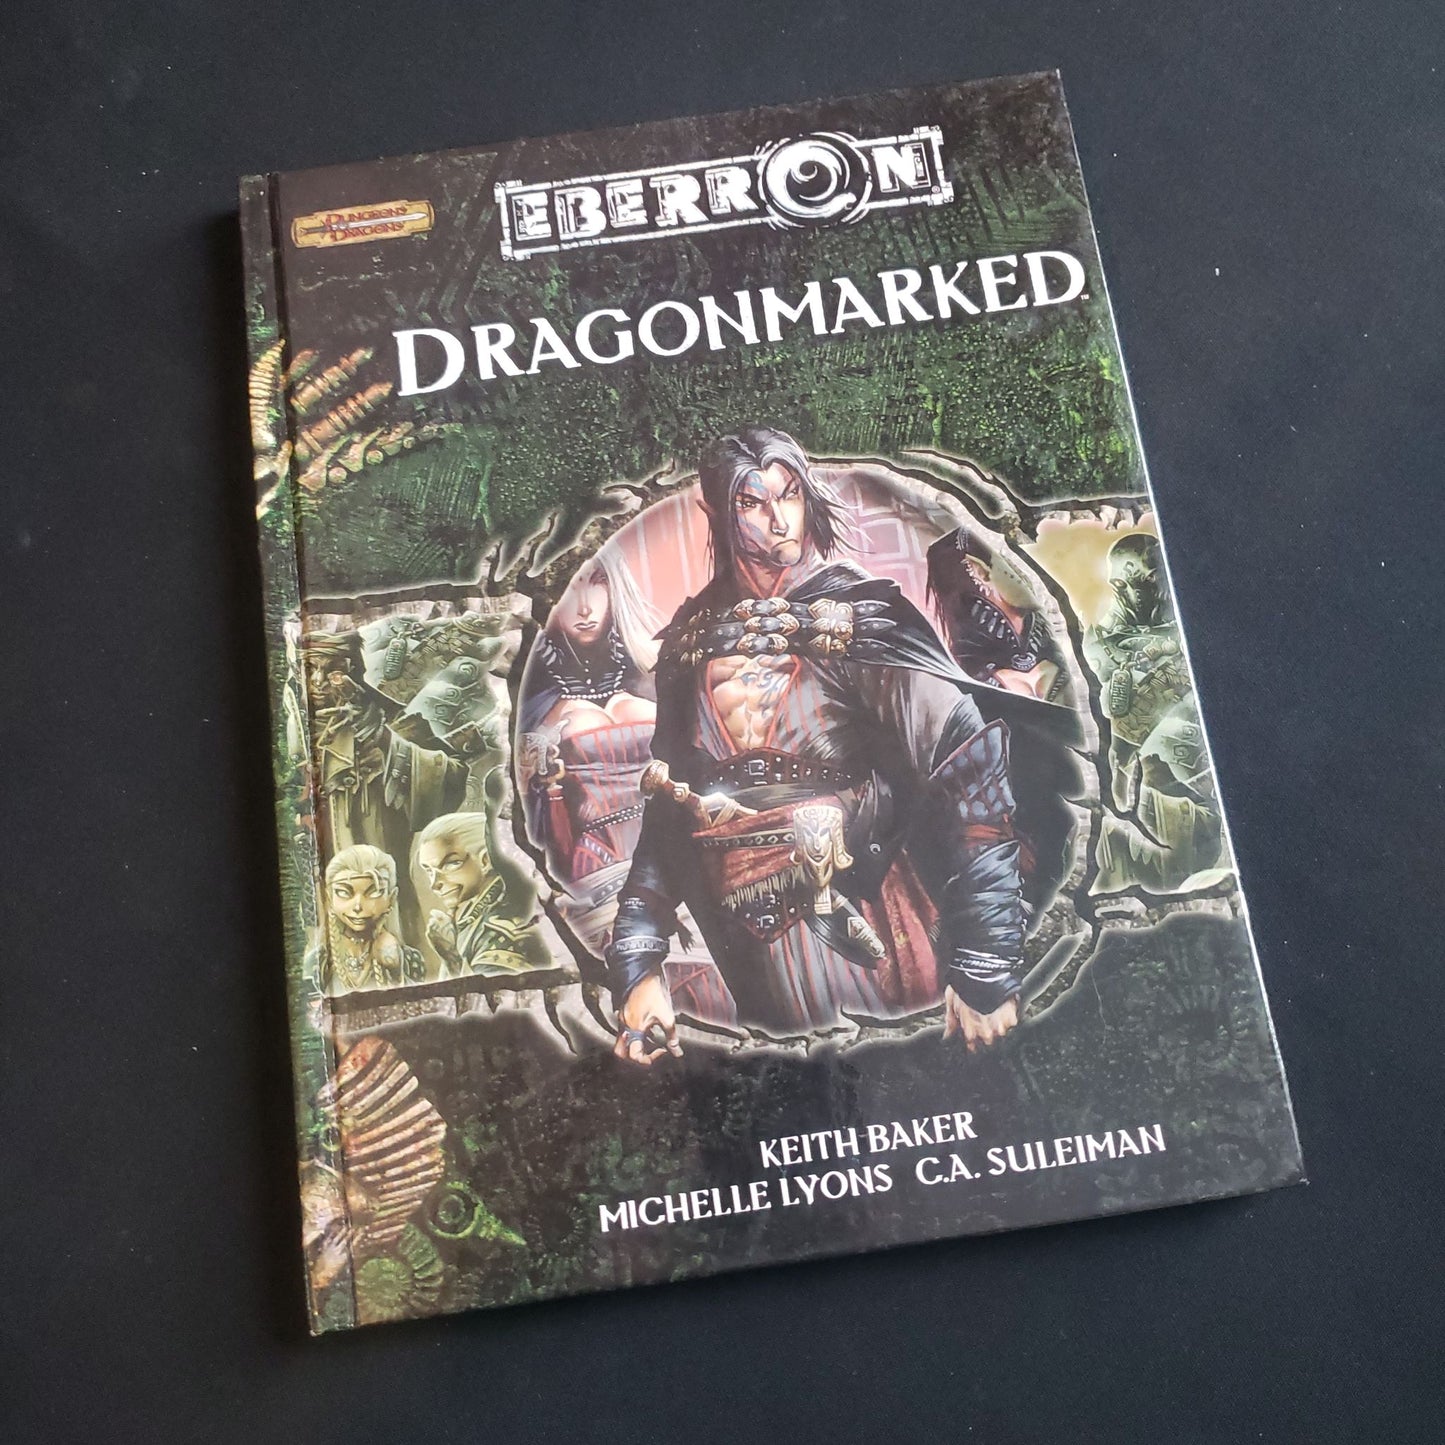 Front cover of the Eberron: Dragonmarked book for the Dungeons and Dragons roleplaying game